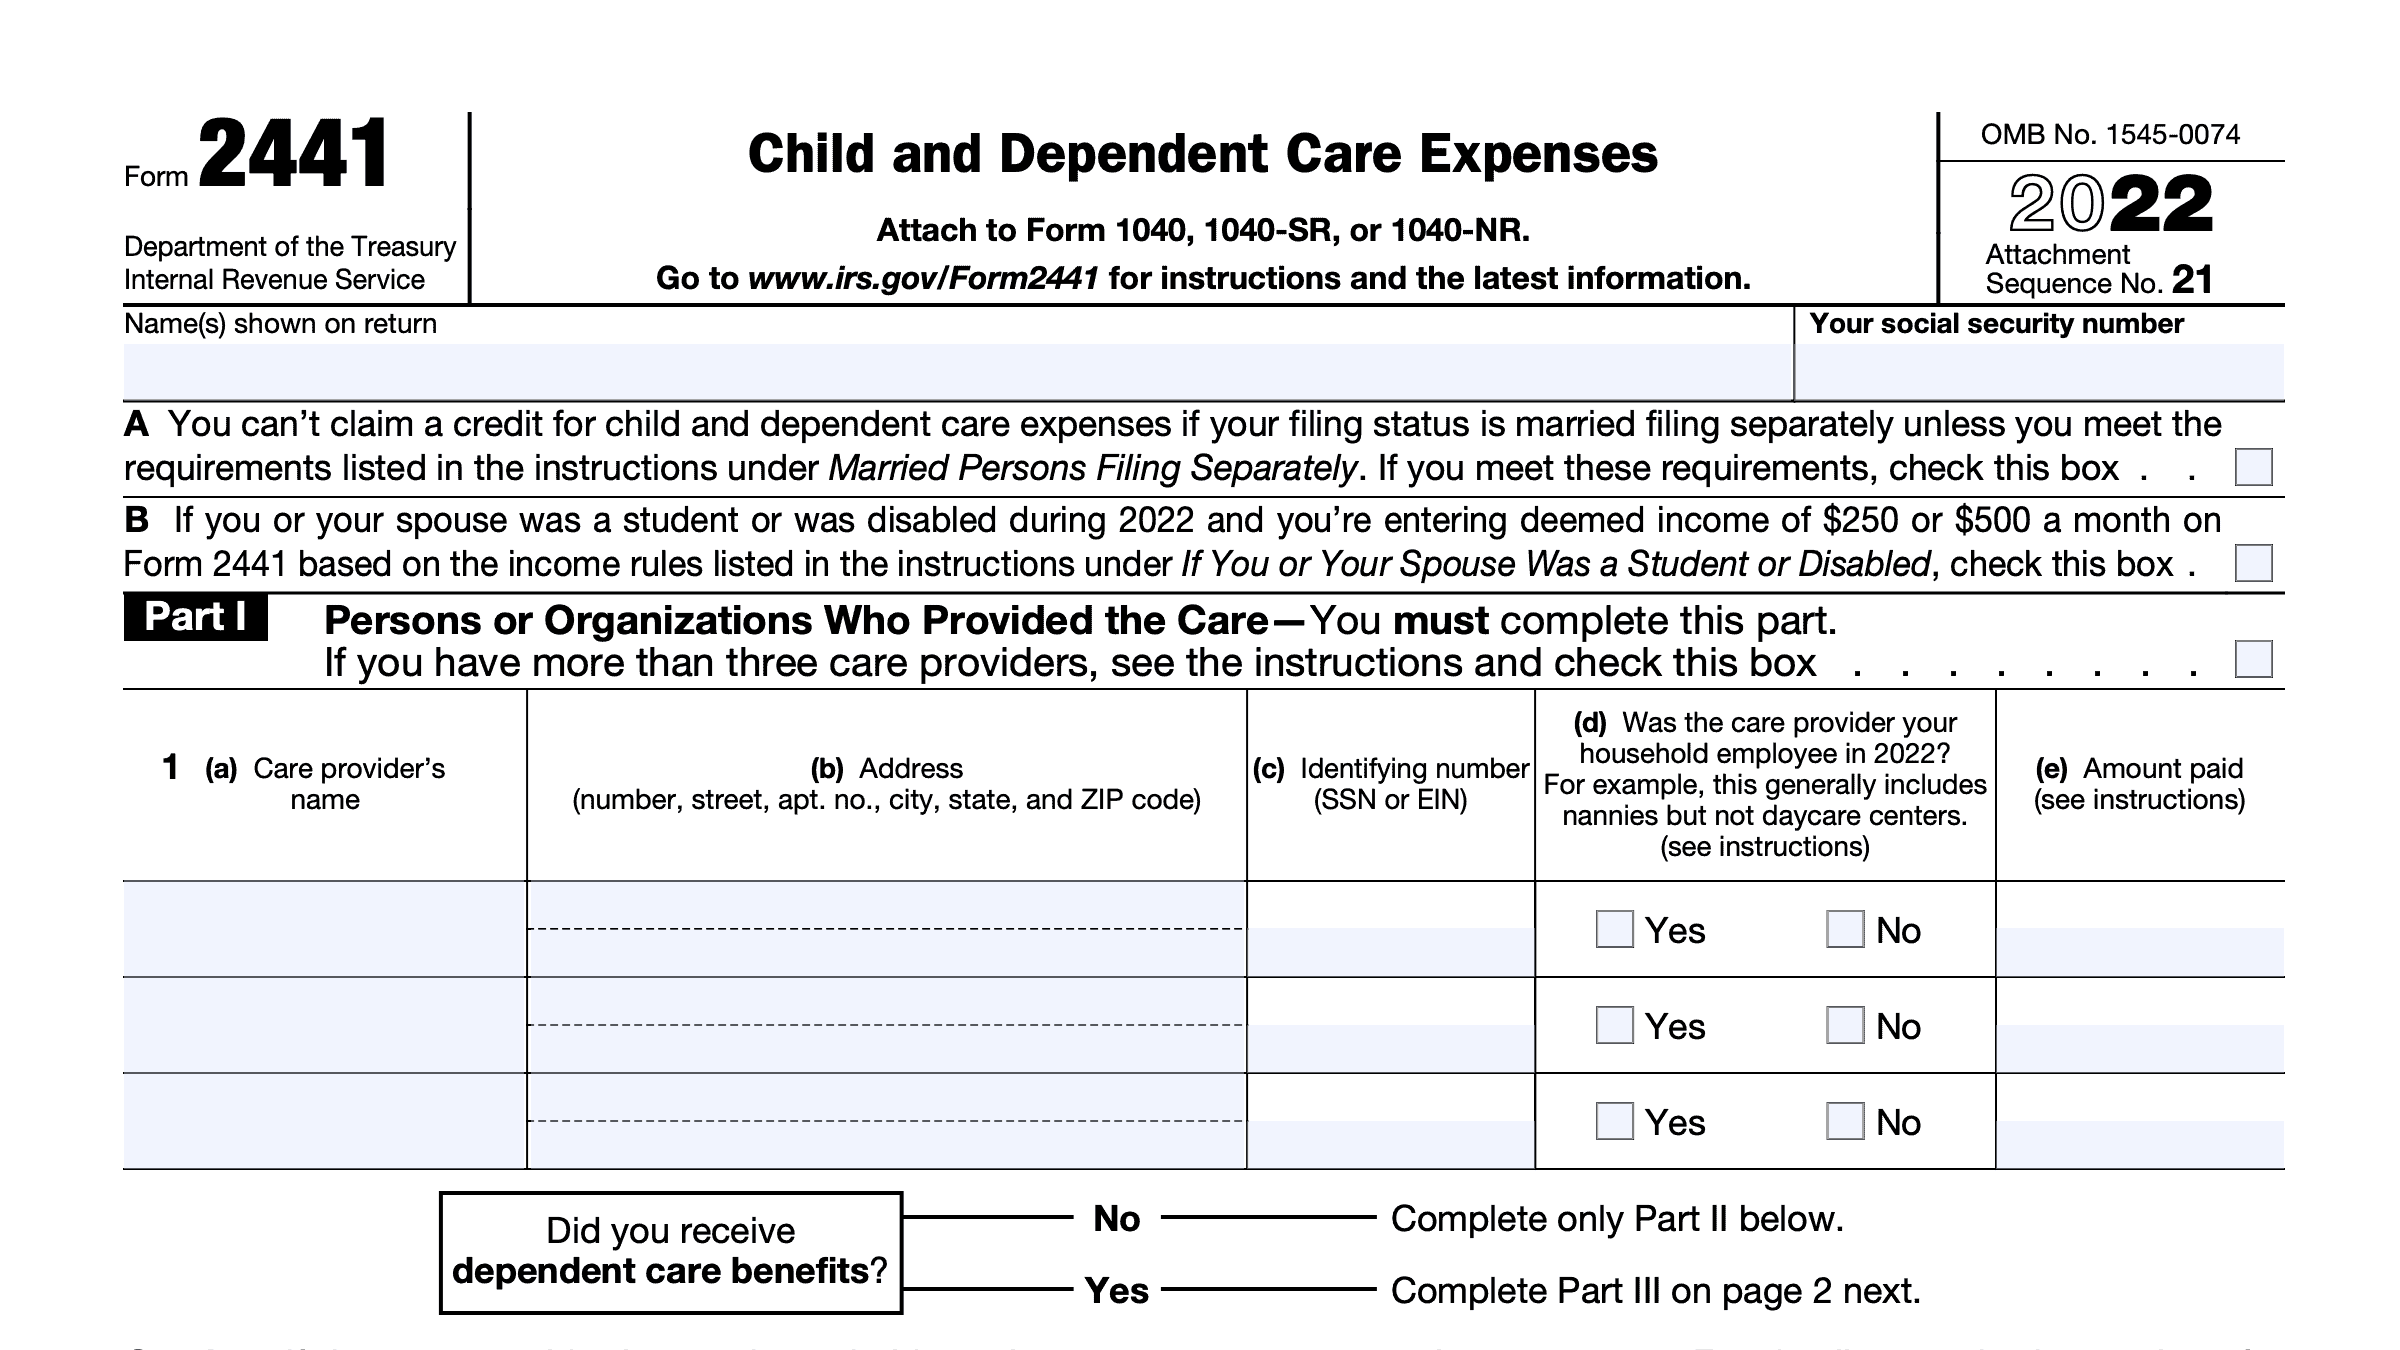 IRS Form 2441 Instructions - Child and Dependent Care Expenses